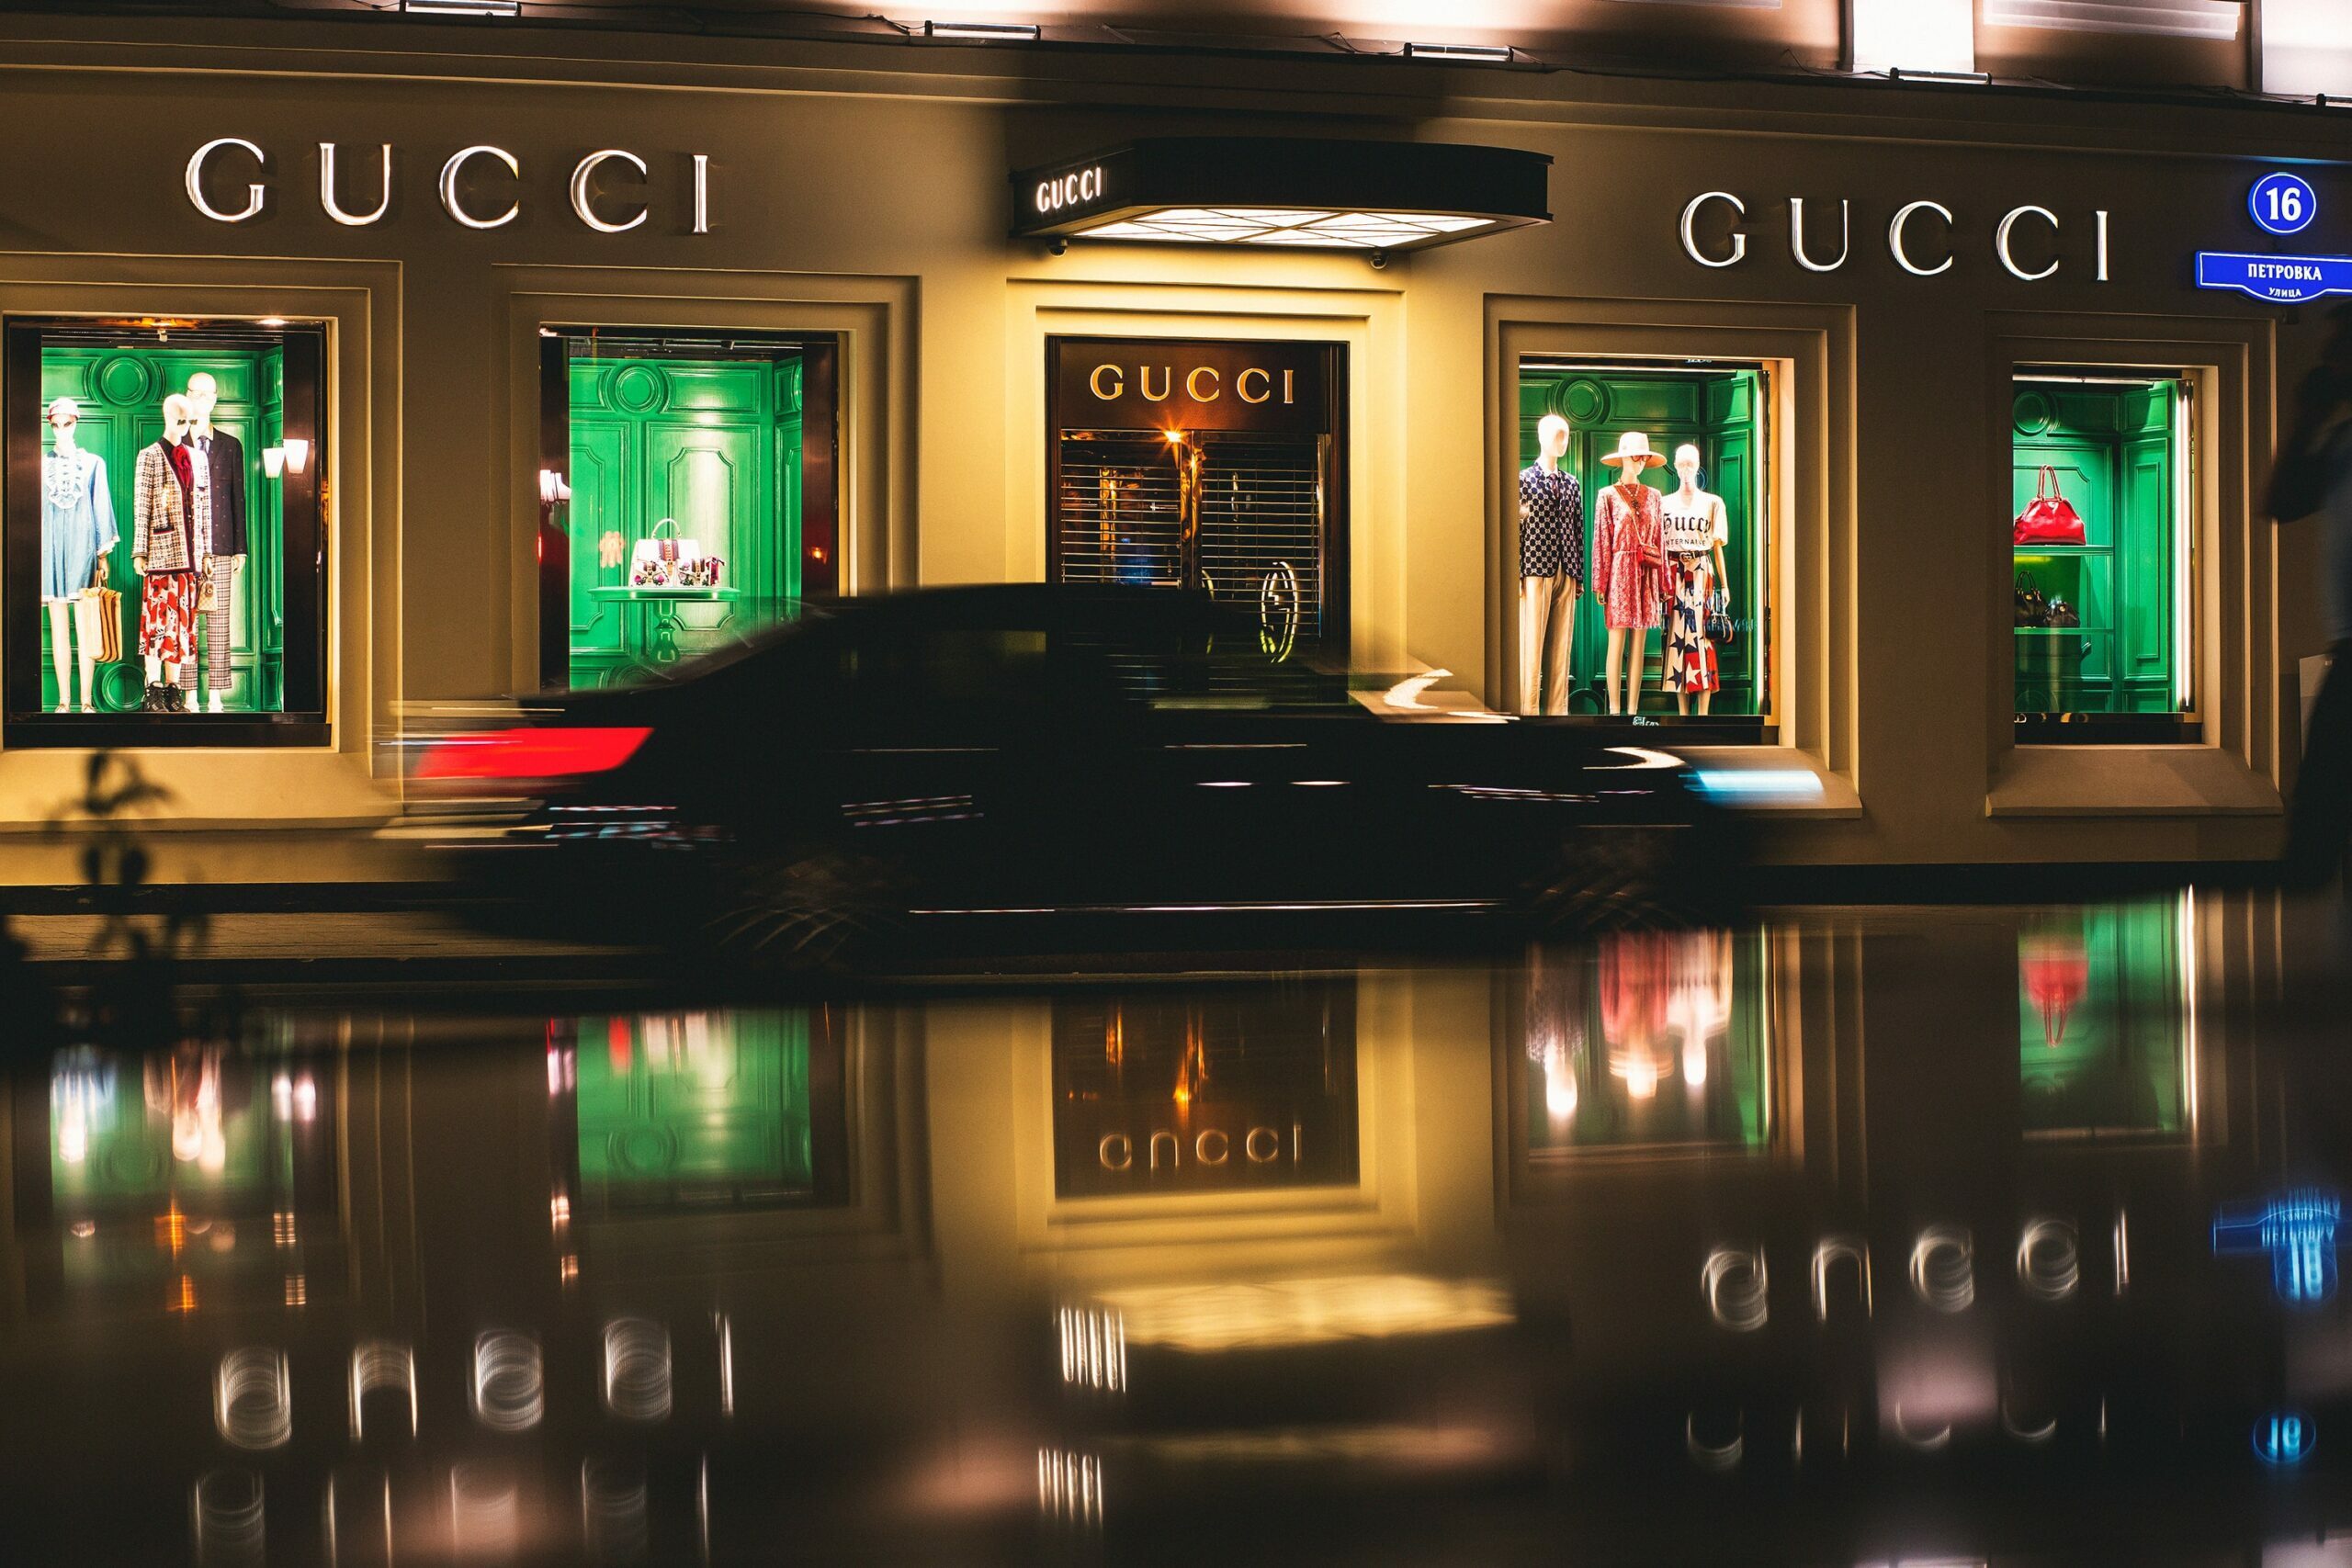 Top Fashion Brand Gucci to accept Cryptocurrencies for In-Store Payments